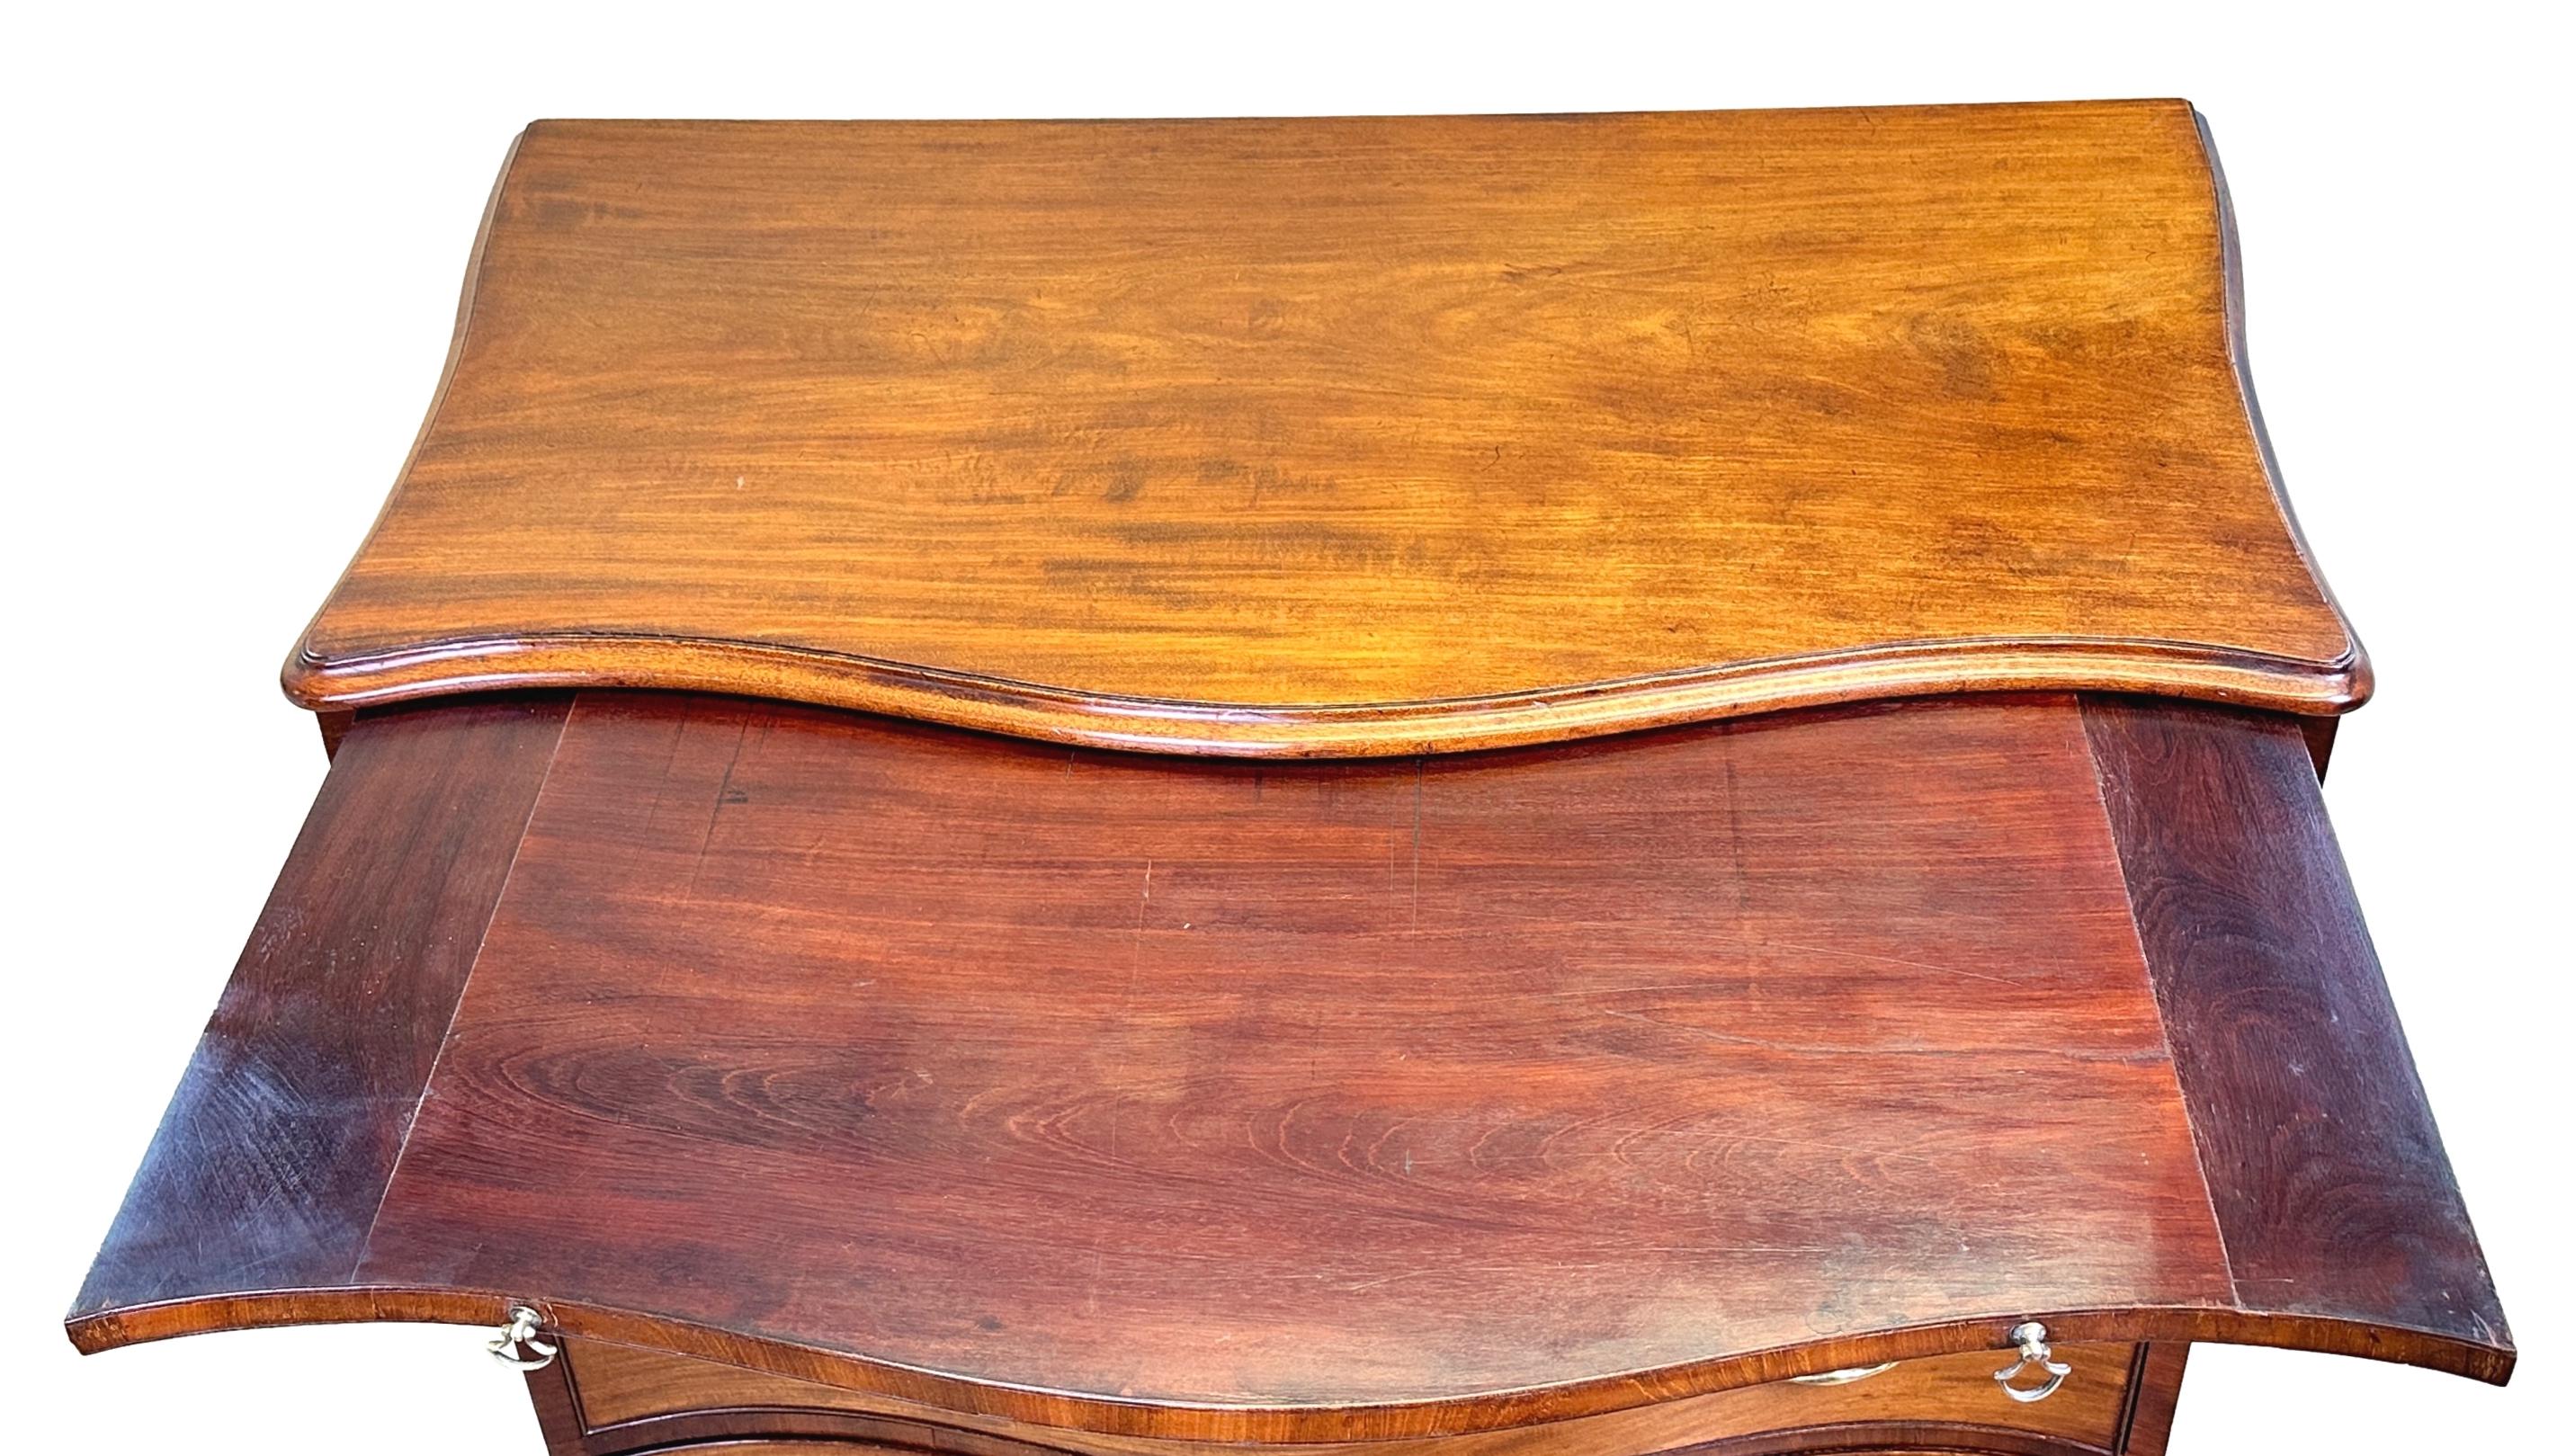 A Very Good Quality Late 18th Century, Georgian, Mahogany Chest, Of Elegant Serpentine Form, Having Well Figured Shaped Top Over Brushing Slide And Four Long Drawers, Retaining Original Brass Swan Neck Handles And Raised On Original Shaped Bracket